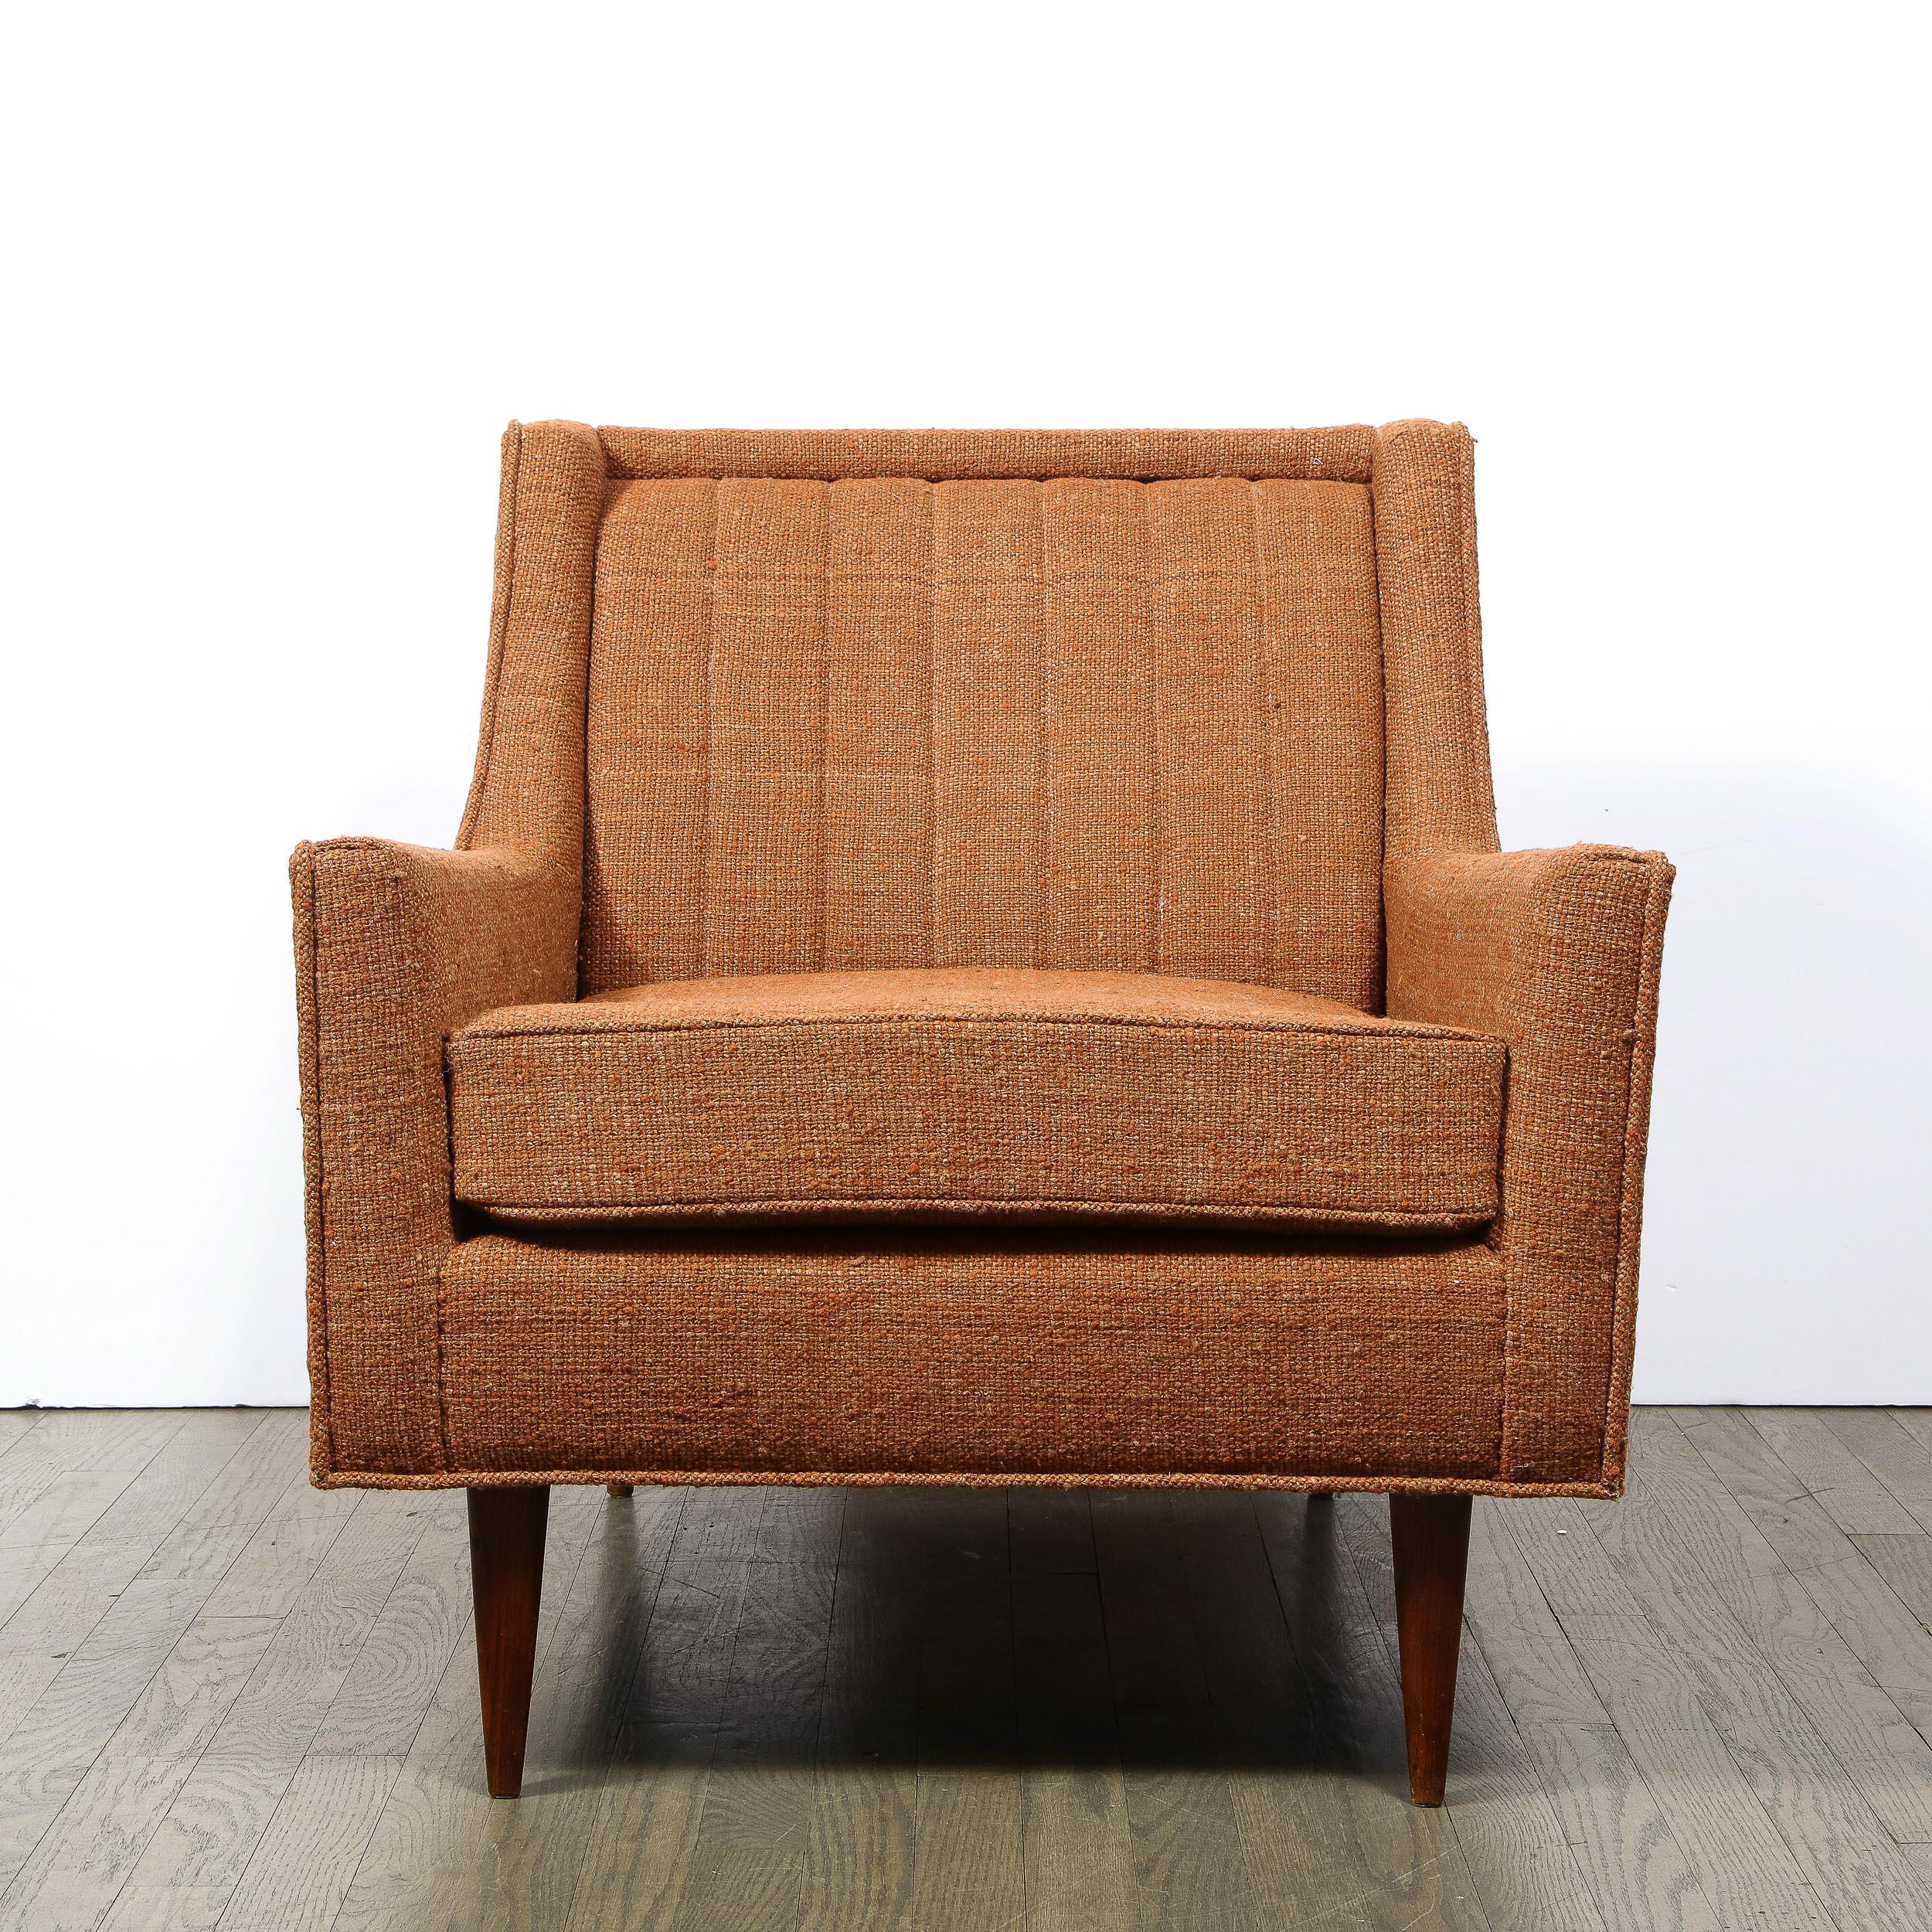 This refined Mid-Century Modern arm chair was realized in the United States circa 1950. Sitting on conical legs, this piece offers a wealth of beautiful details including channel detailing on its subtly shadowboxed back and clean geometric angles